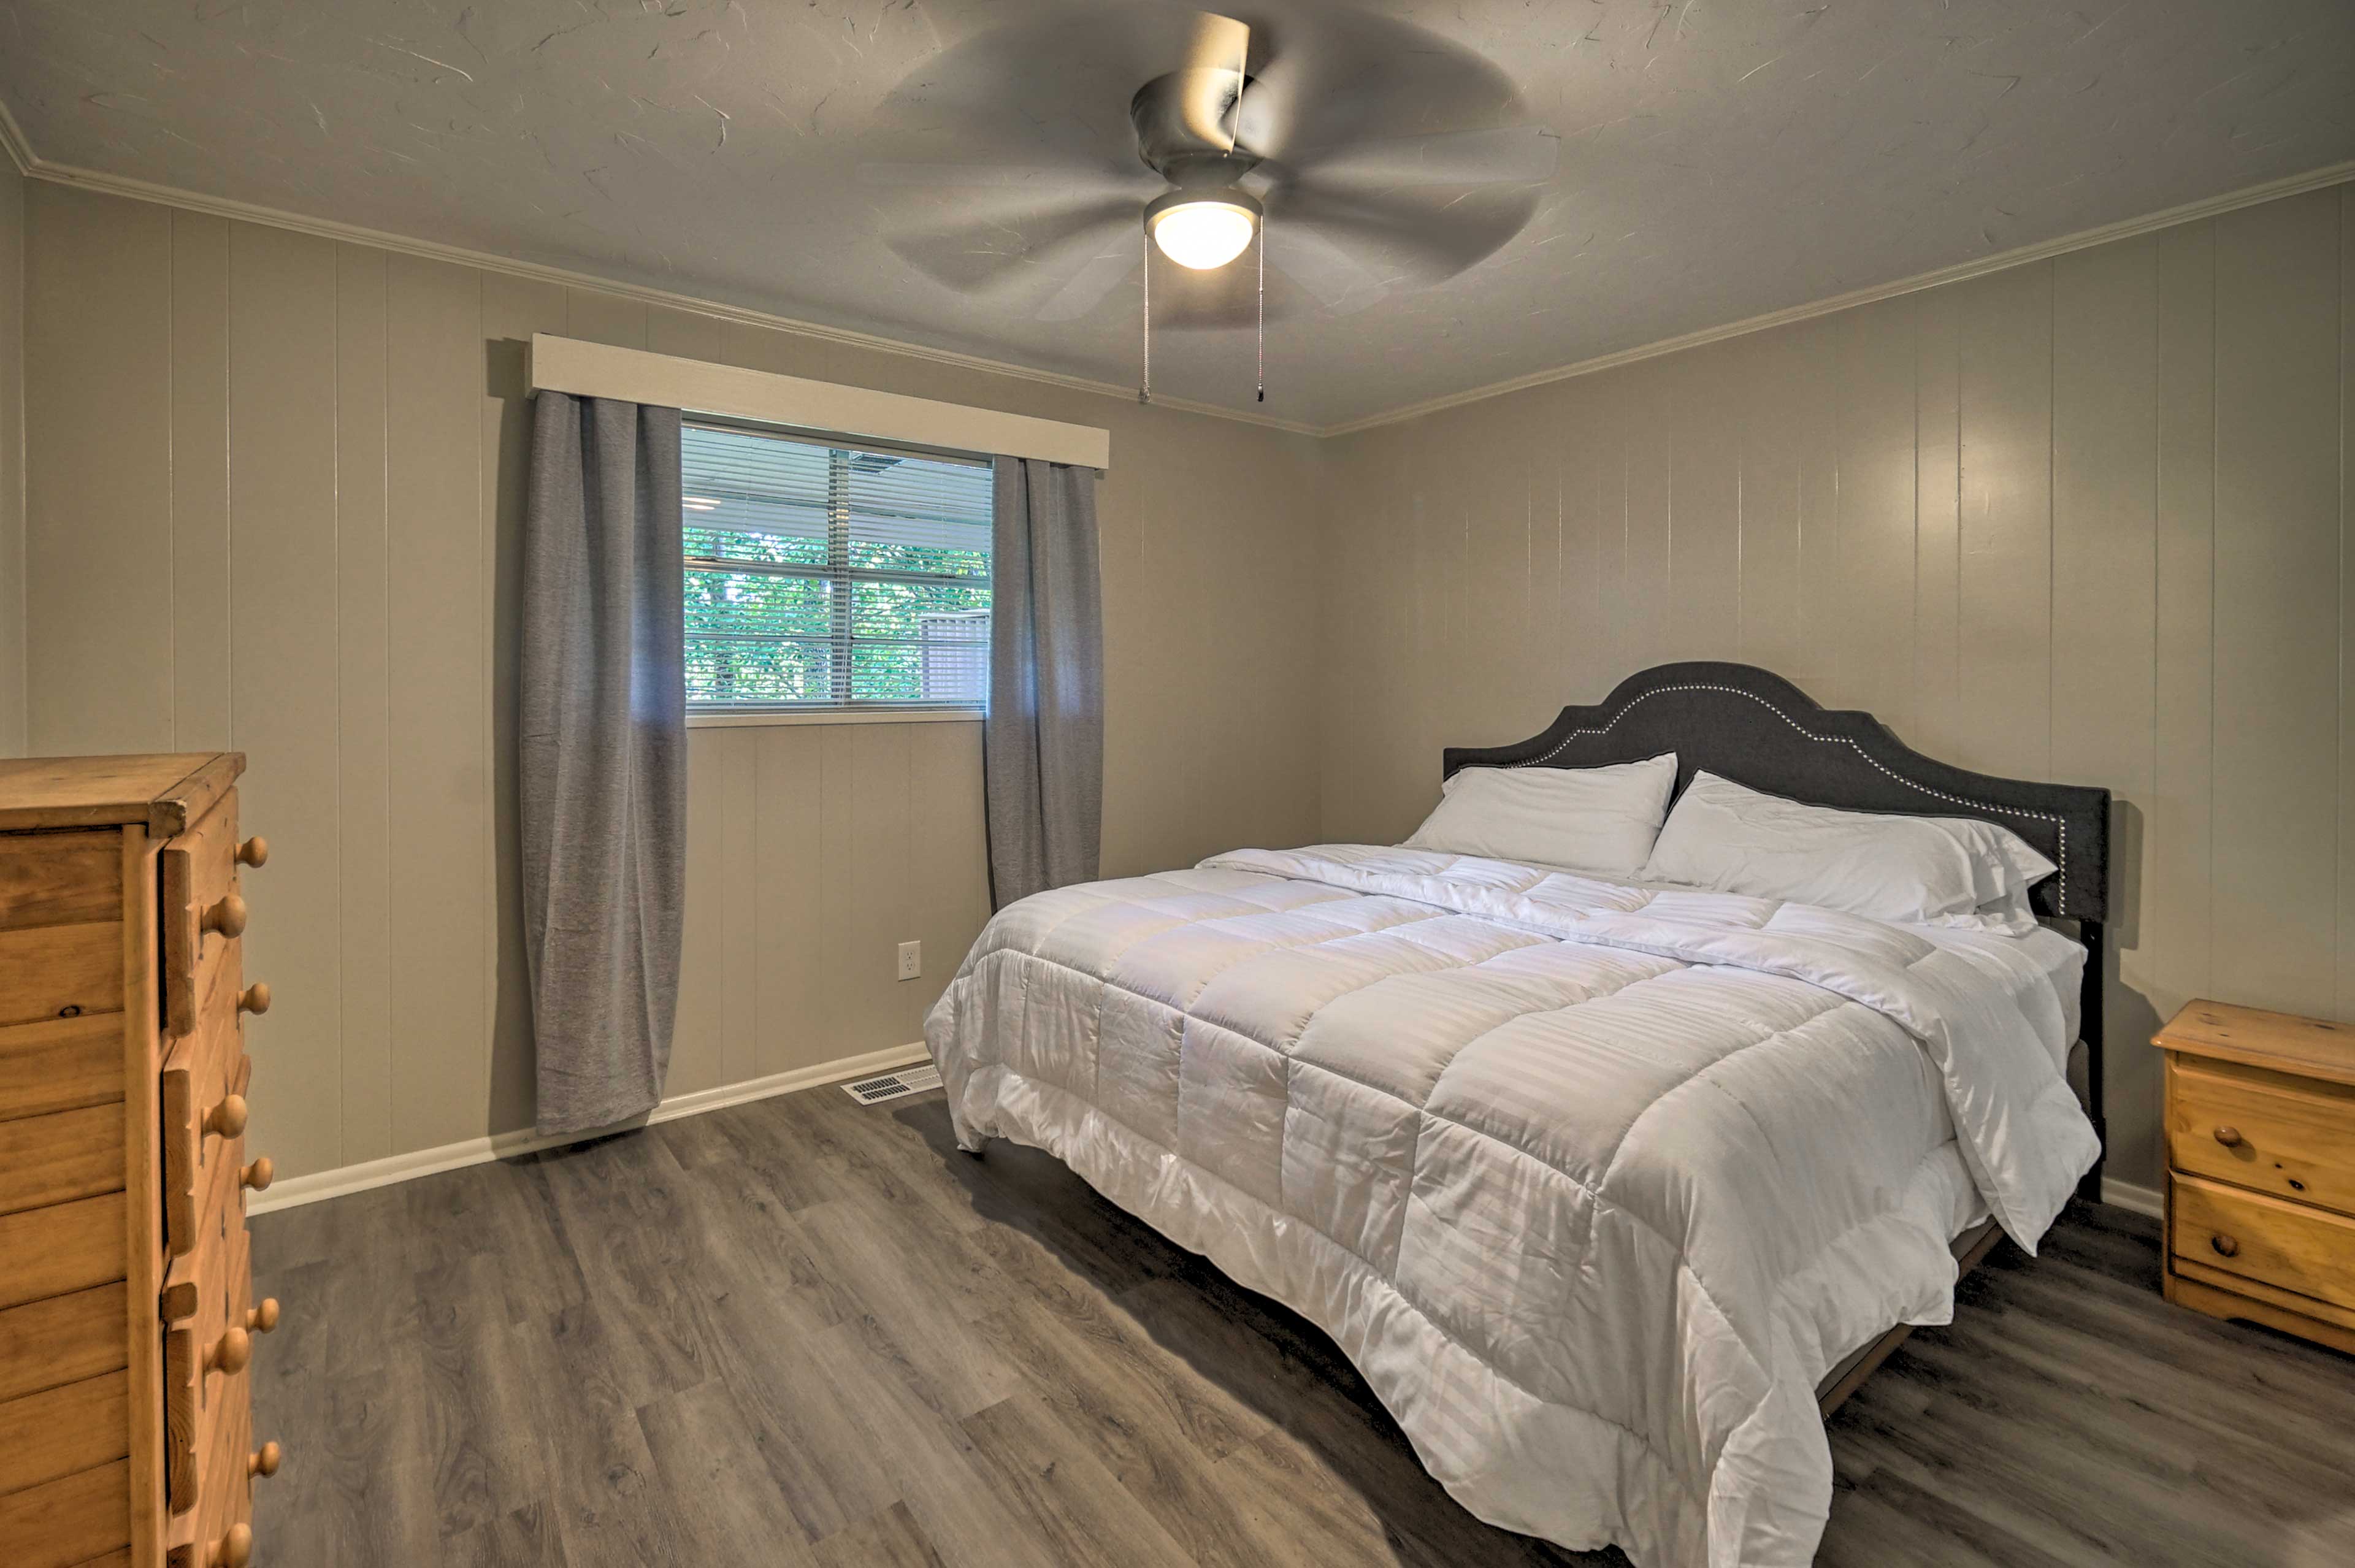 This second bedroom features a California king bed.